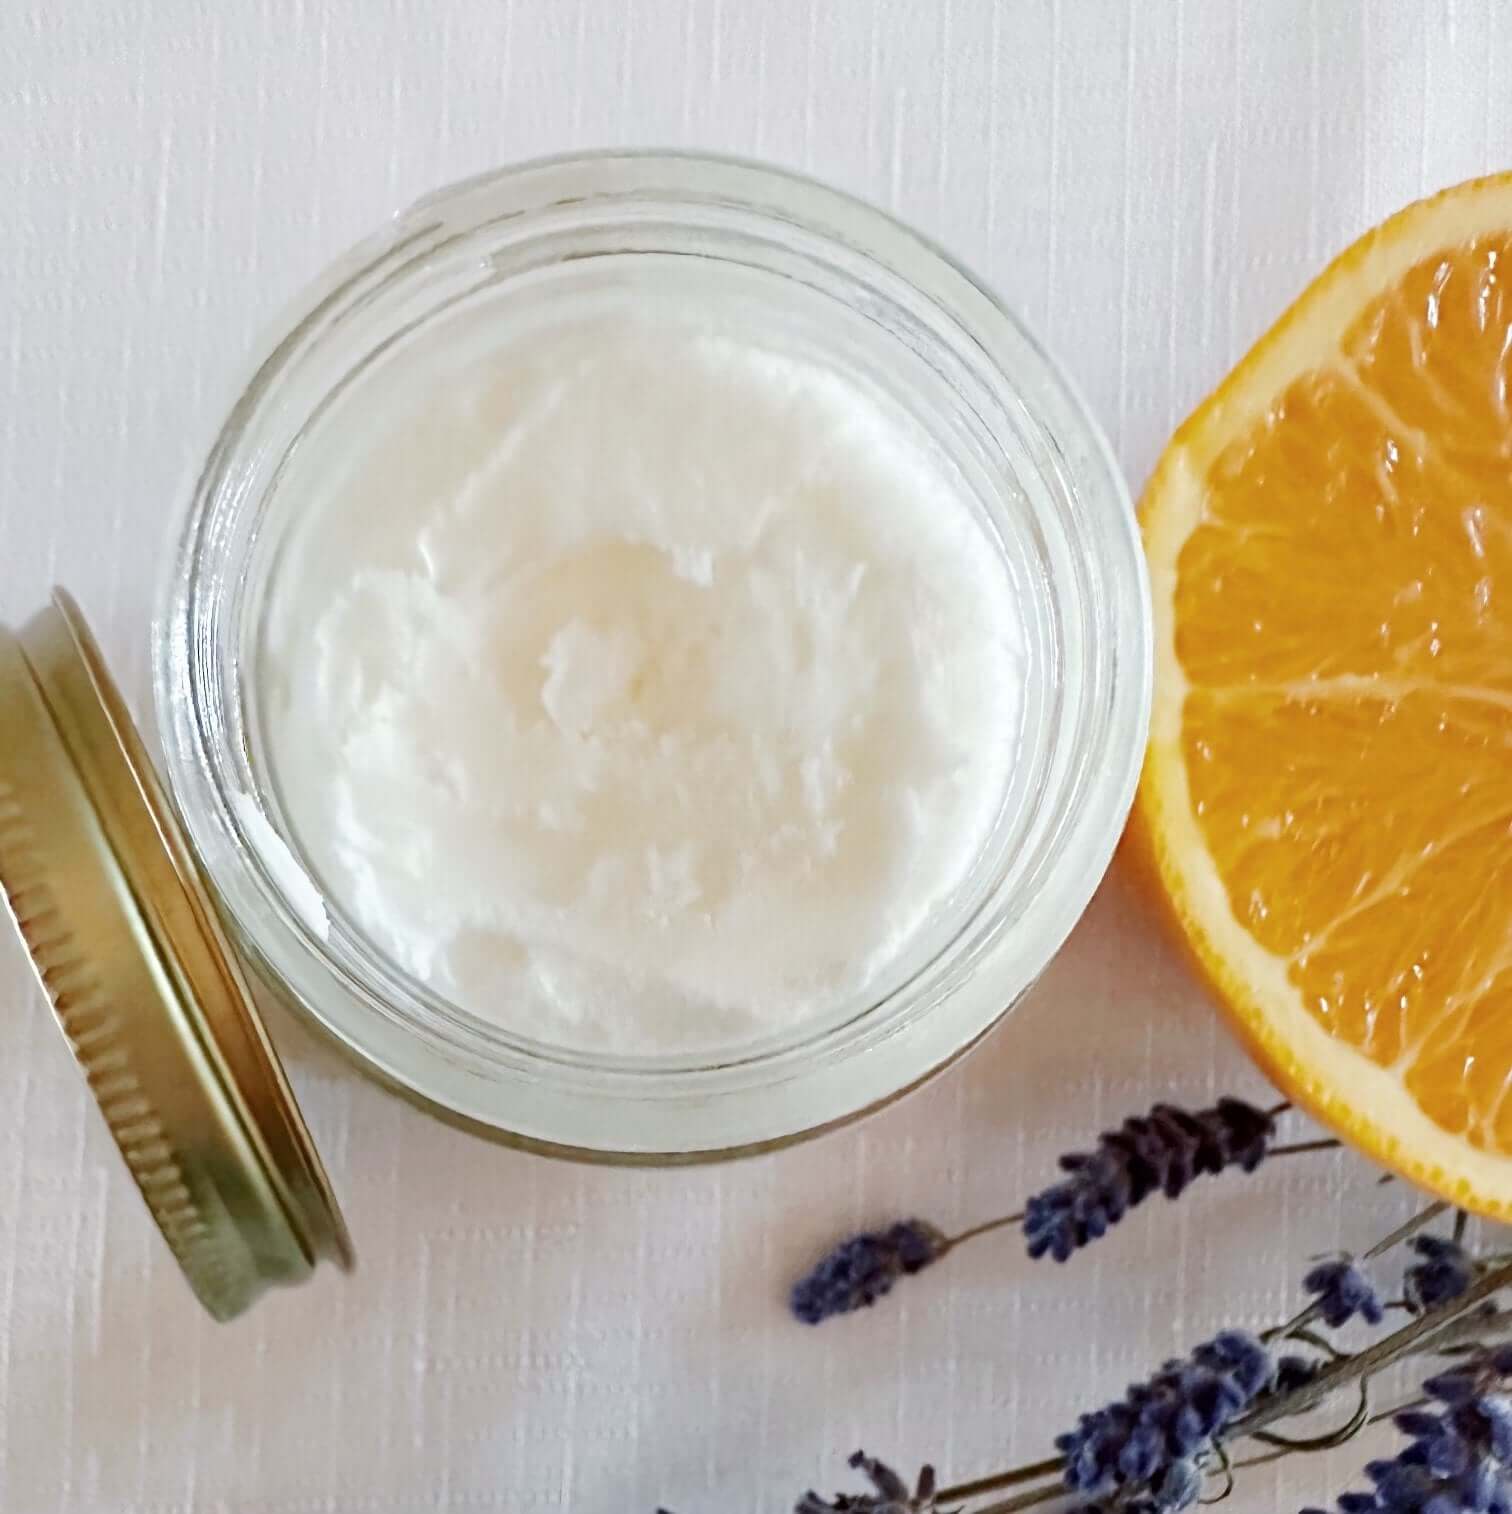 Pemberley Orange and Lavender Scented Whipped Tallow Balm